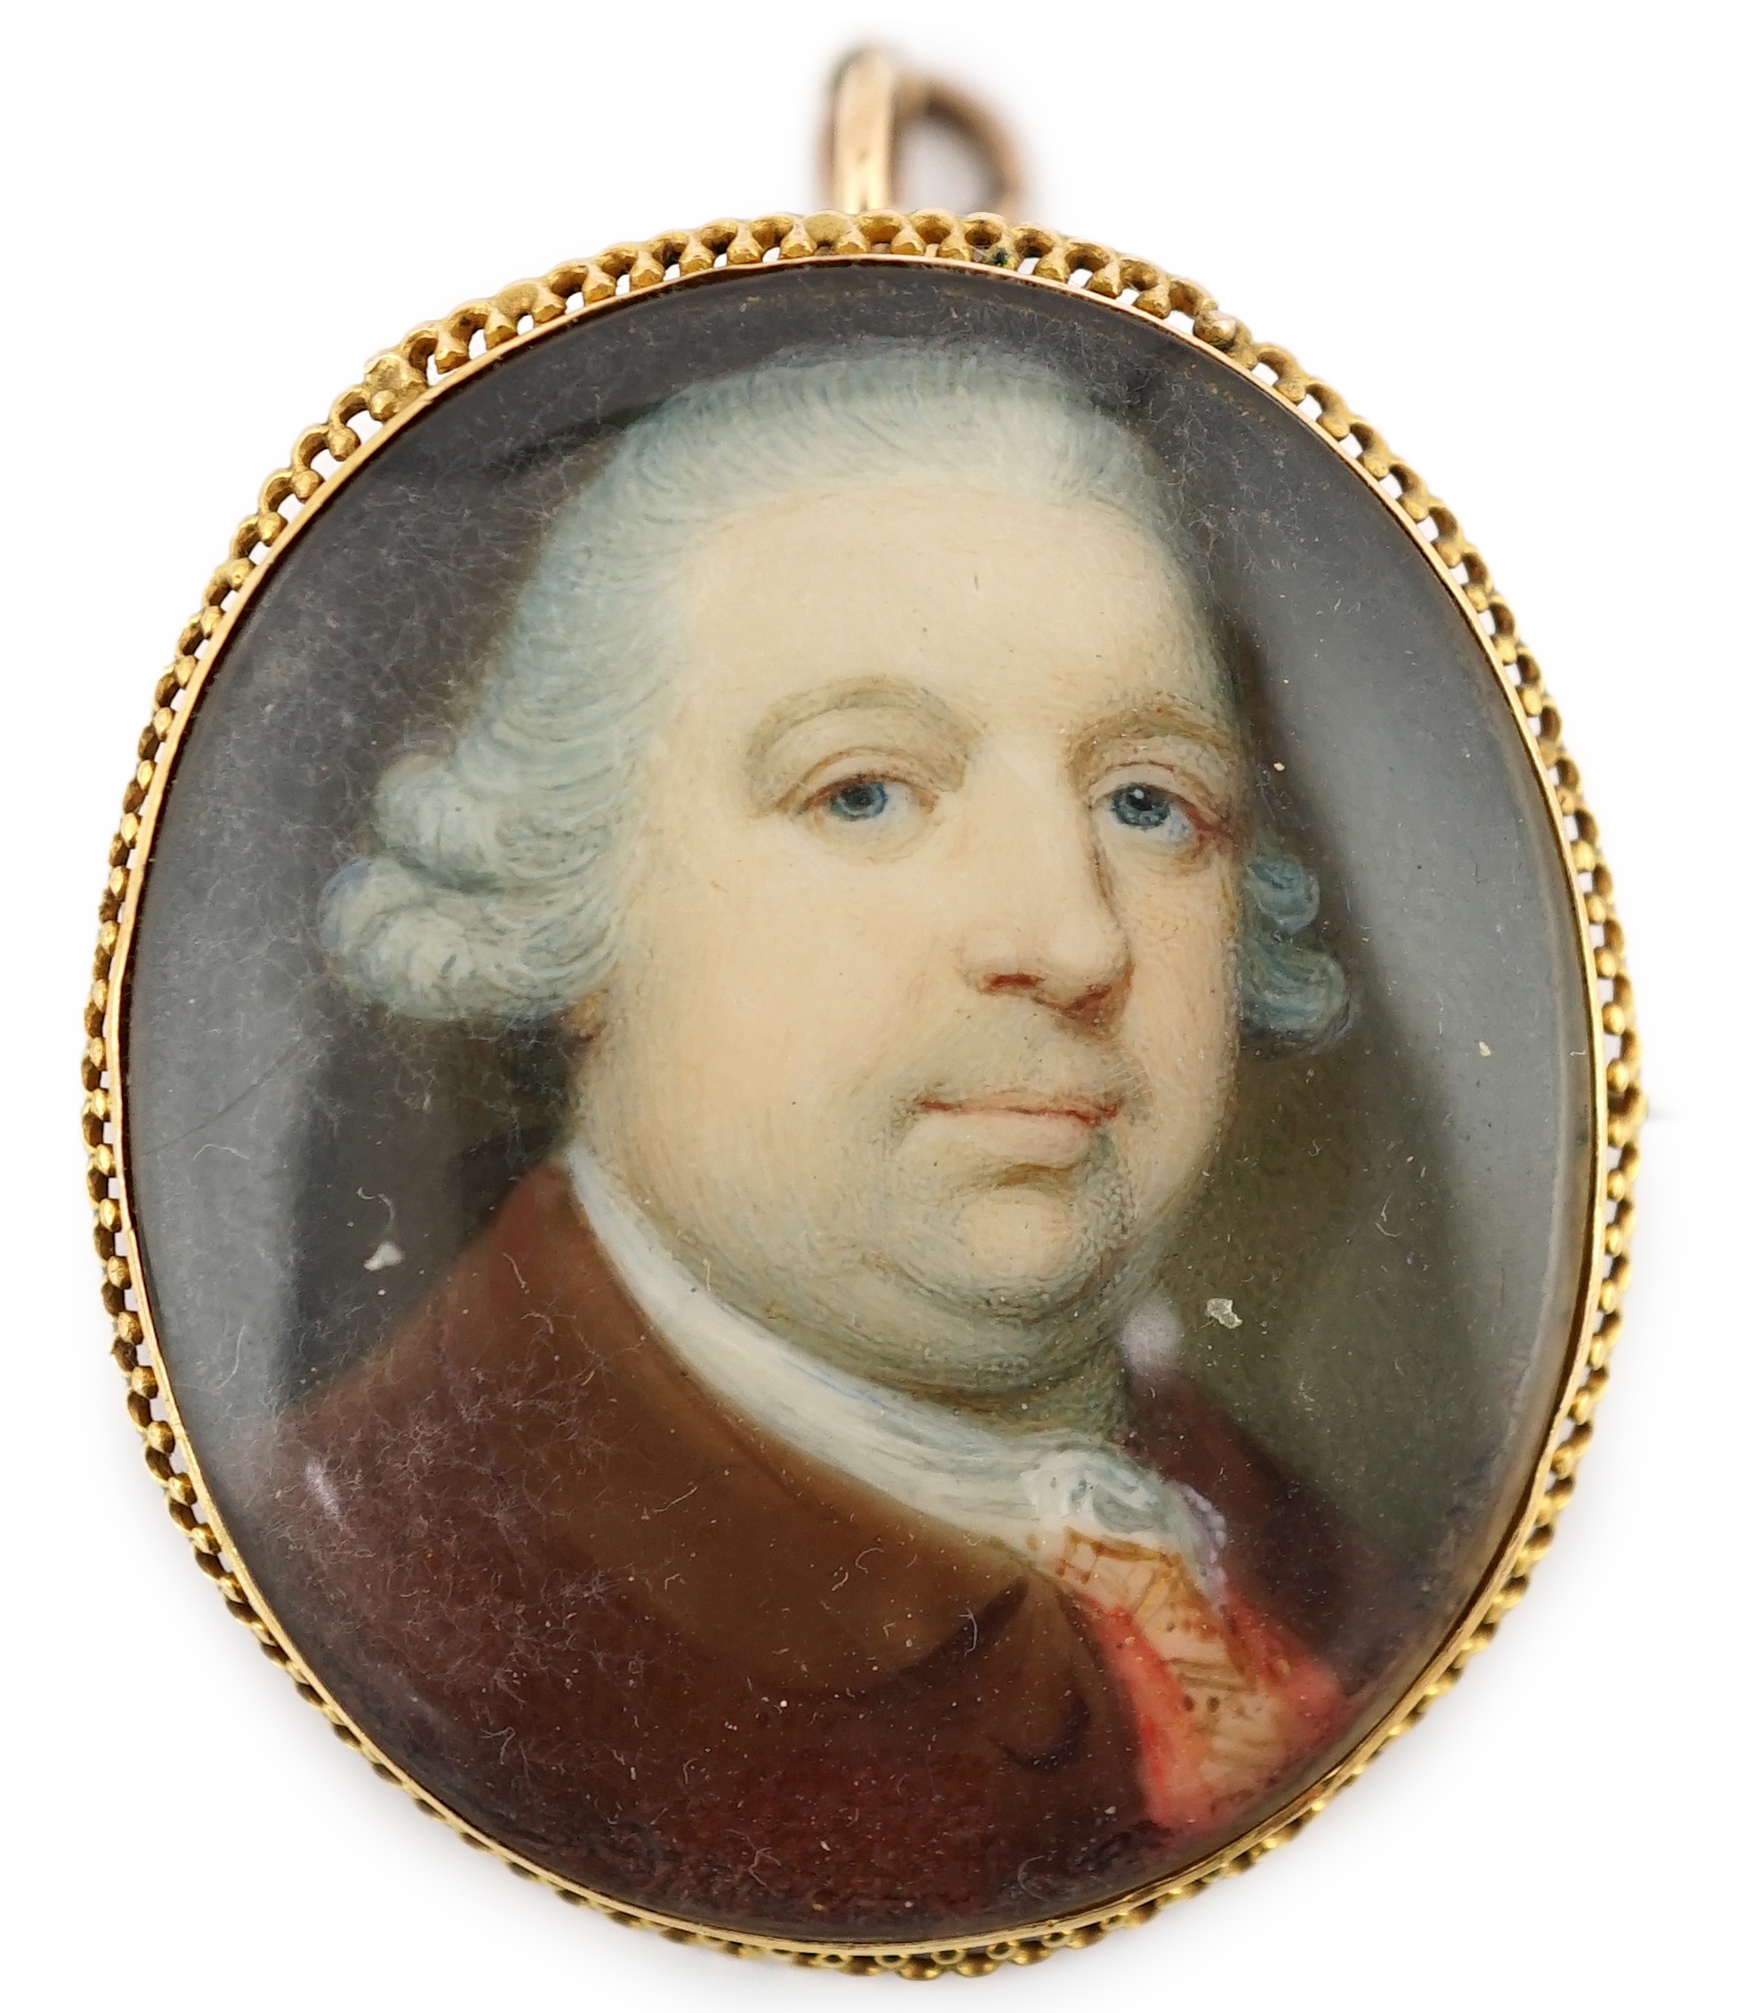 Jeremiah Meyer, R.A. (Anglo-German, 1735-1789), Portrait miniature of a gentleman, oil on ivory, 3.3 x 2.8cm. CITES Submission reference MUSLAF6C